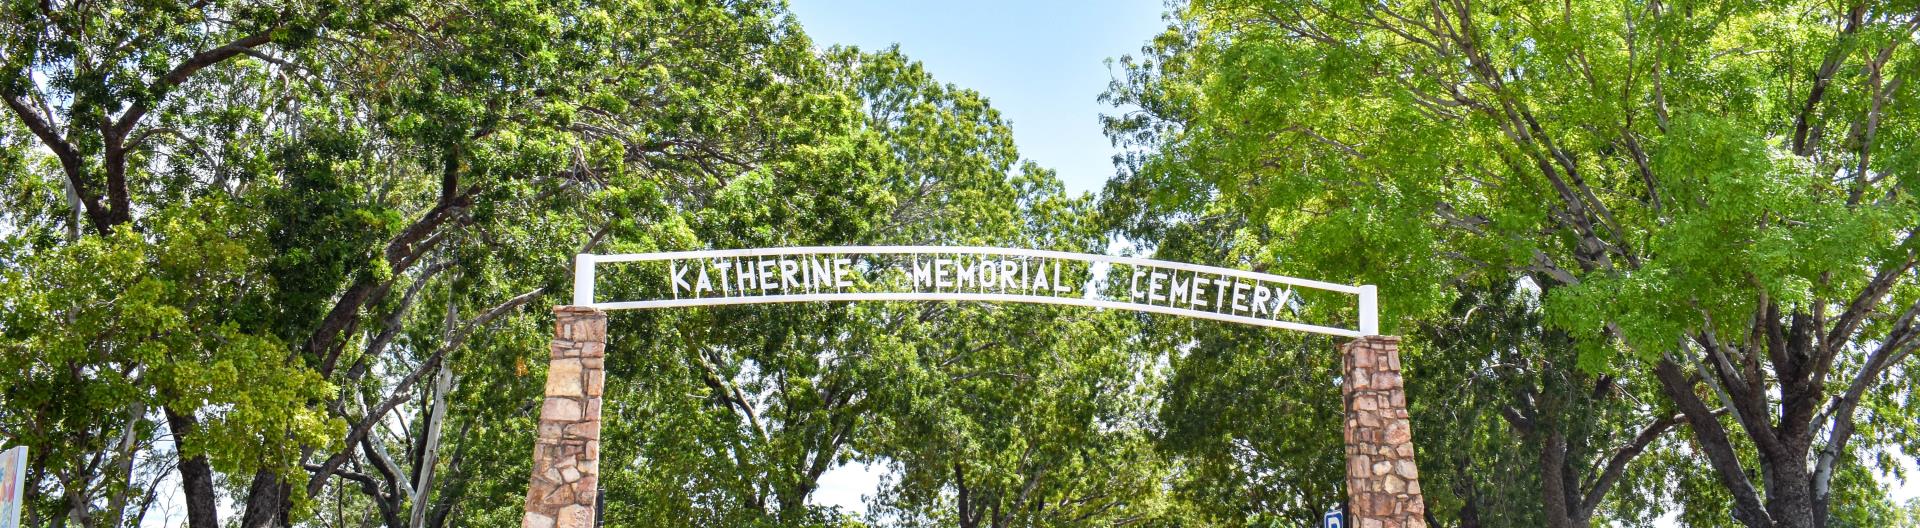 Banner - Cemetery » Katherine Town Council